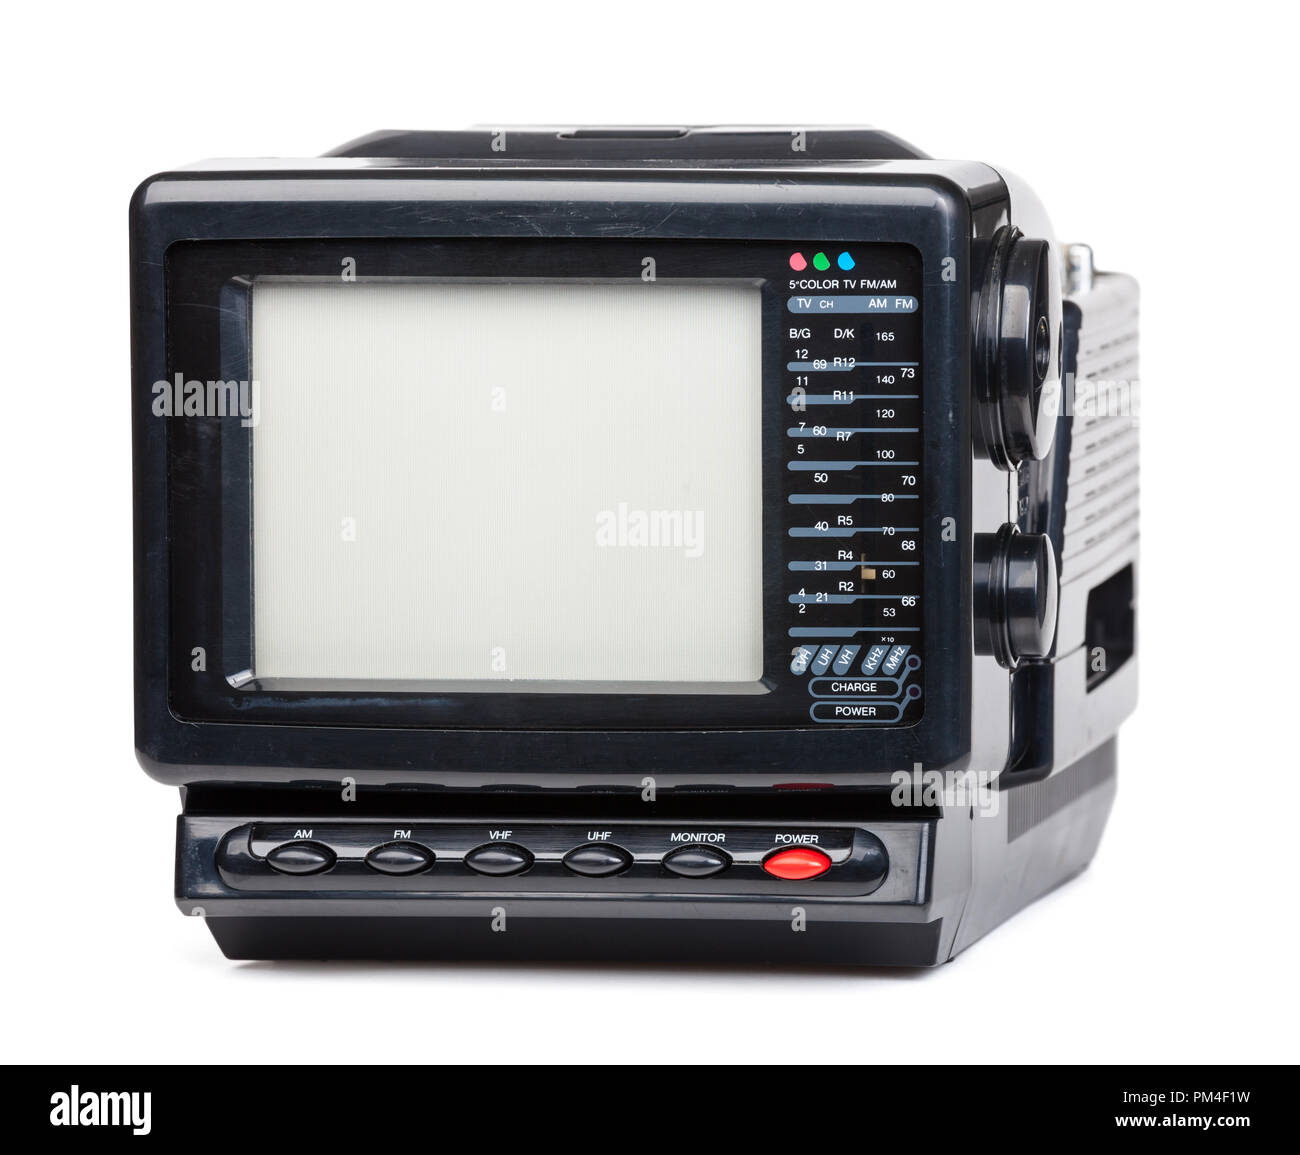 Television Set 1990's High Resolution Stock Photography and Images - Alamy